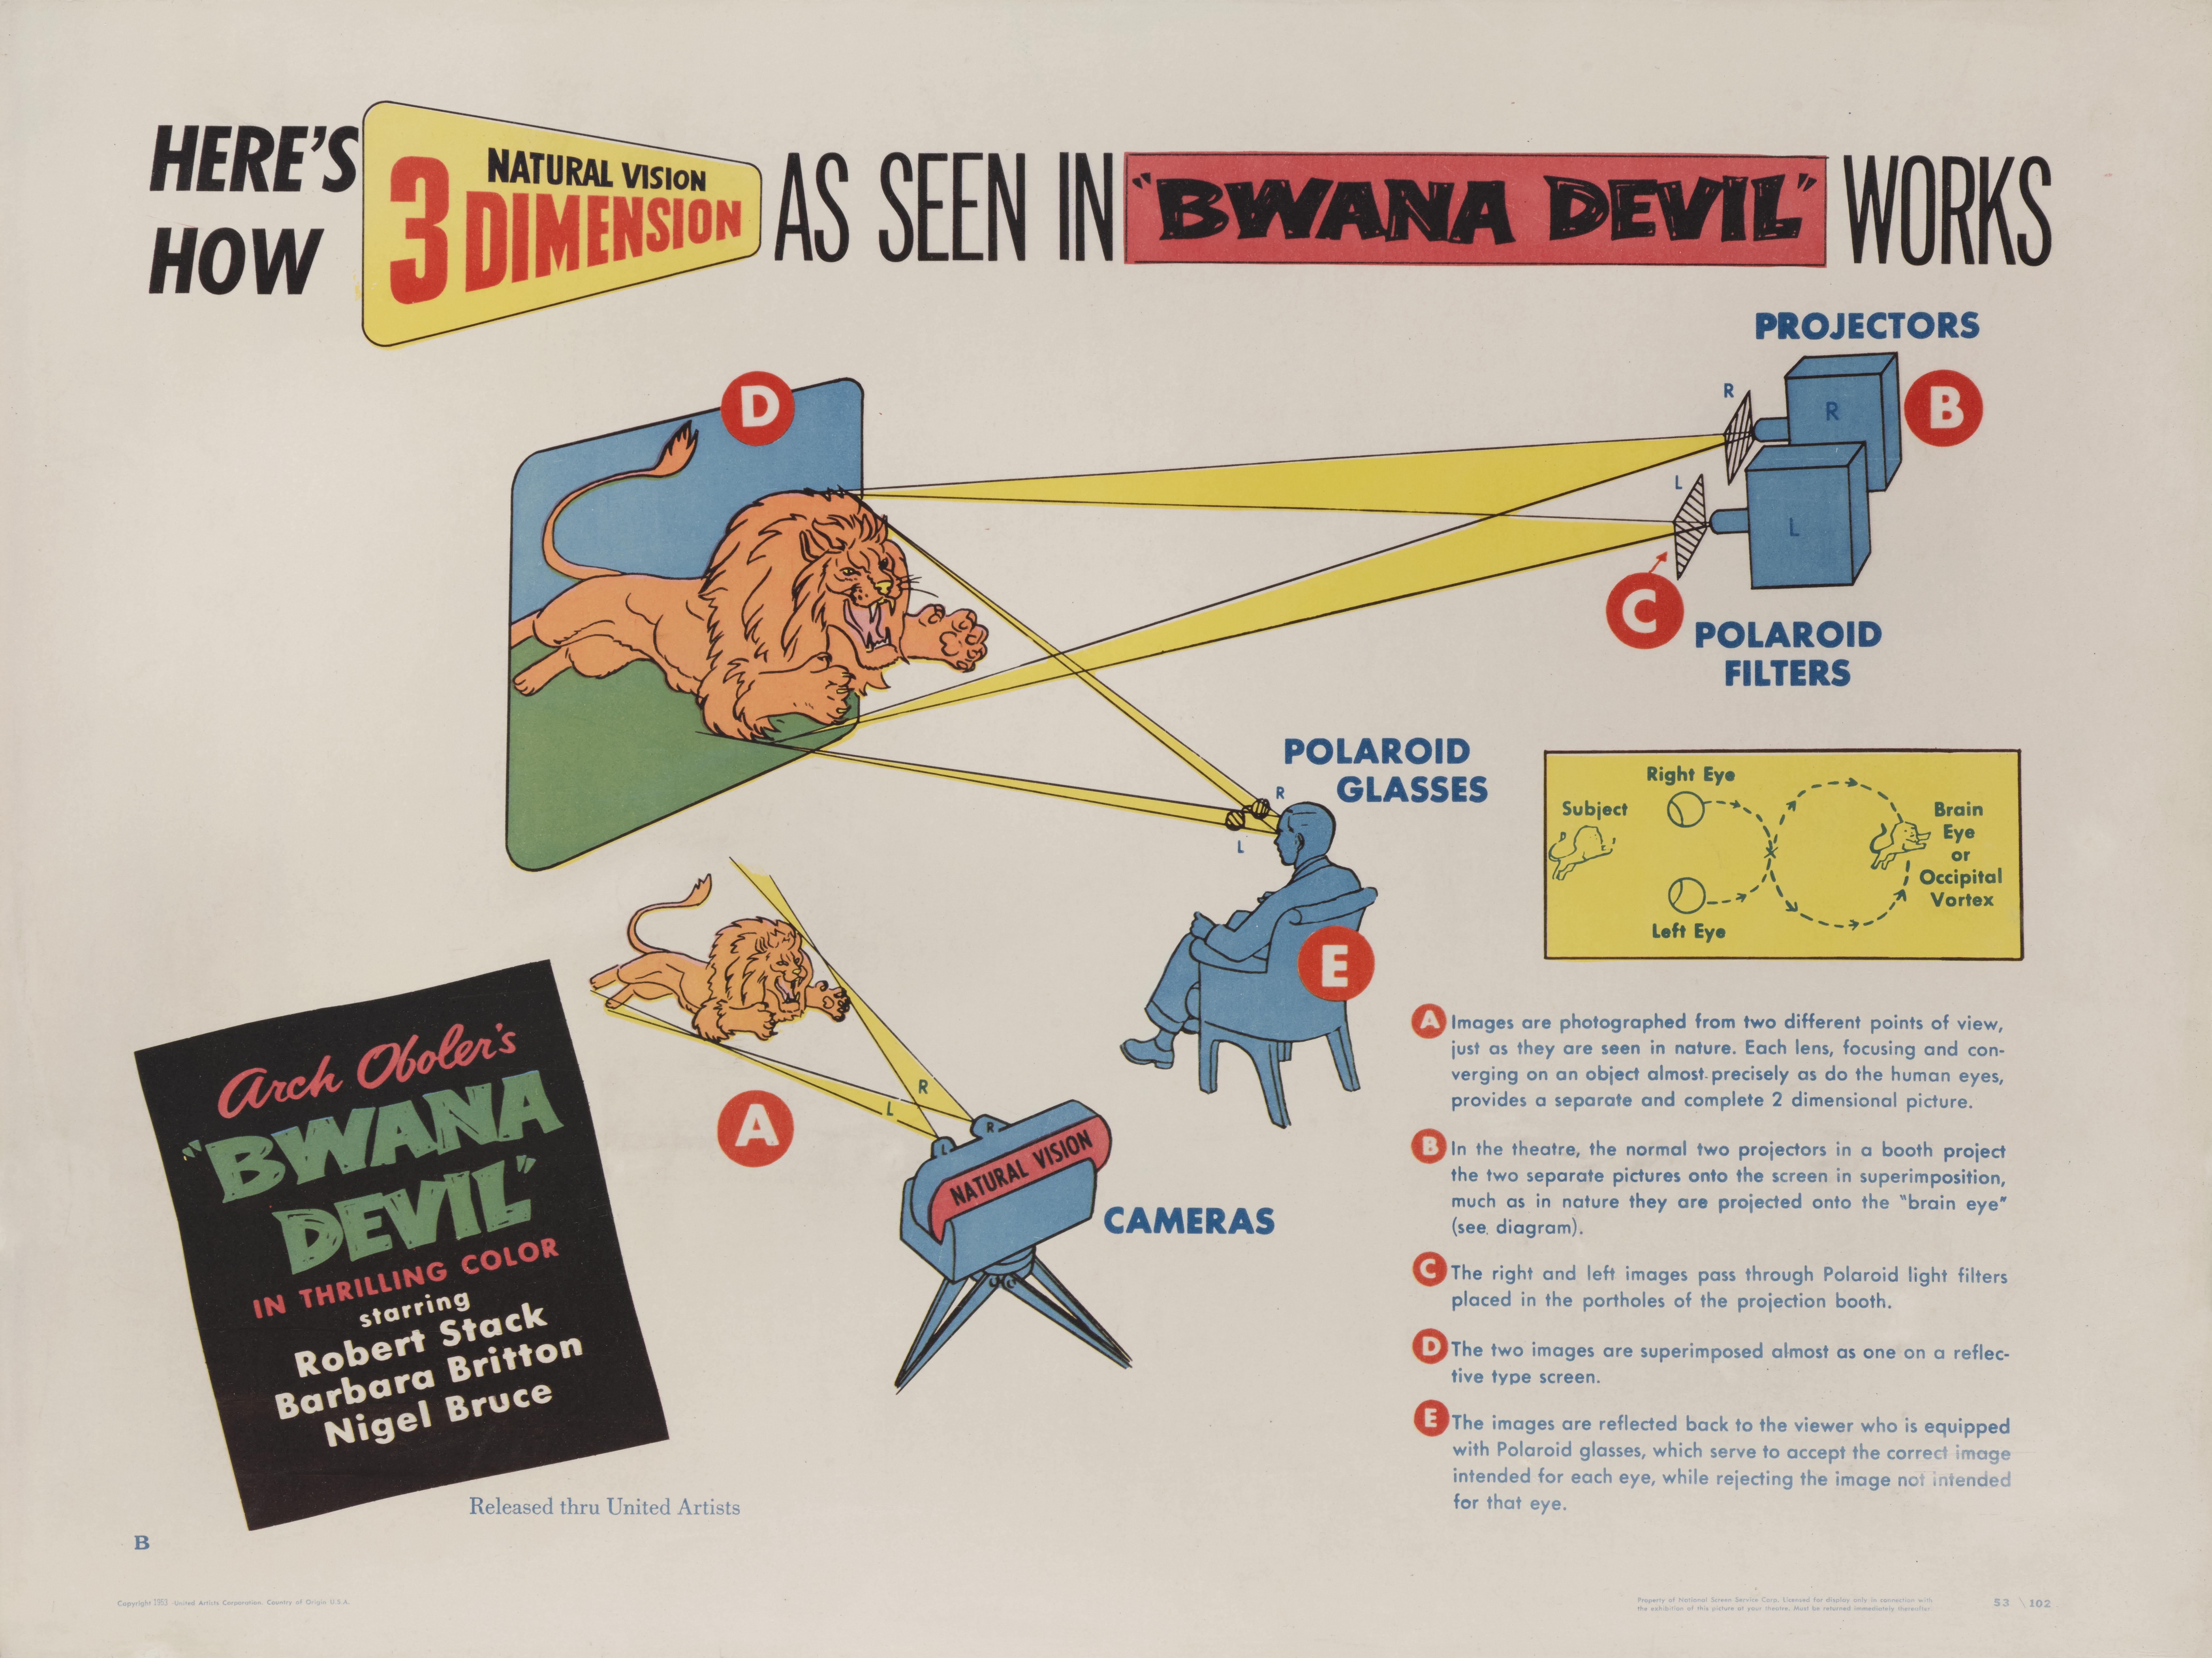 Original US film poster for the 1953 3-D adventure film Bwana Devil, starring Robert Stack, Barbara Britton, Nigel Bruce. The film was directed by Arch Oboler and Robert Clampett.
This rare film poster depicting how 3-D technology works, is from one